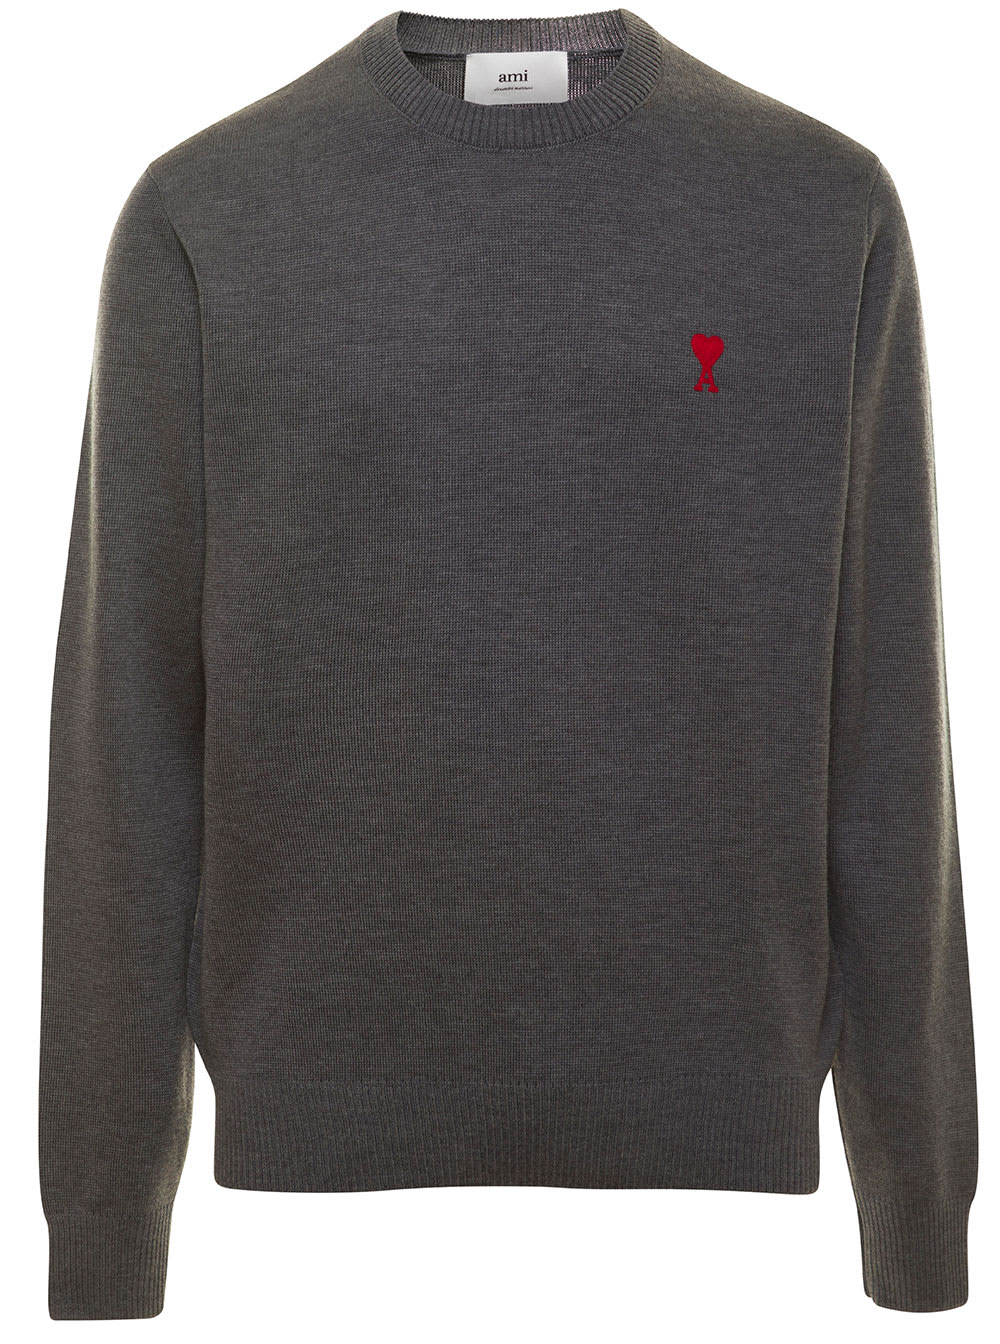 AMI ALEXANDRE MATTIUSSI GREY CREWNECK SWEATER WITH CONTRASTING LOGO EMBROIDERY IN WOOL MAN